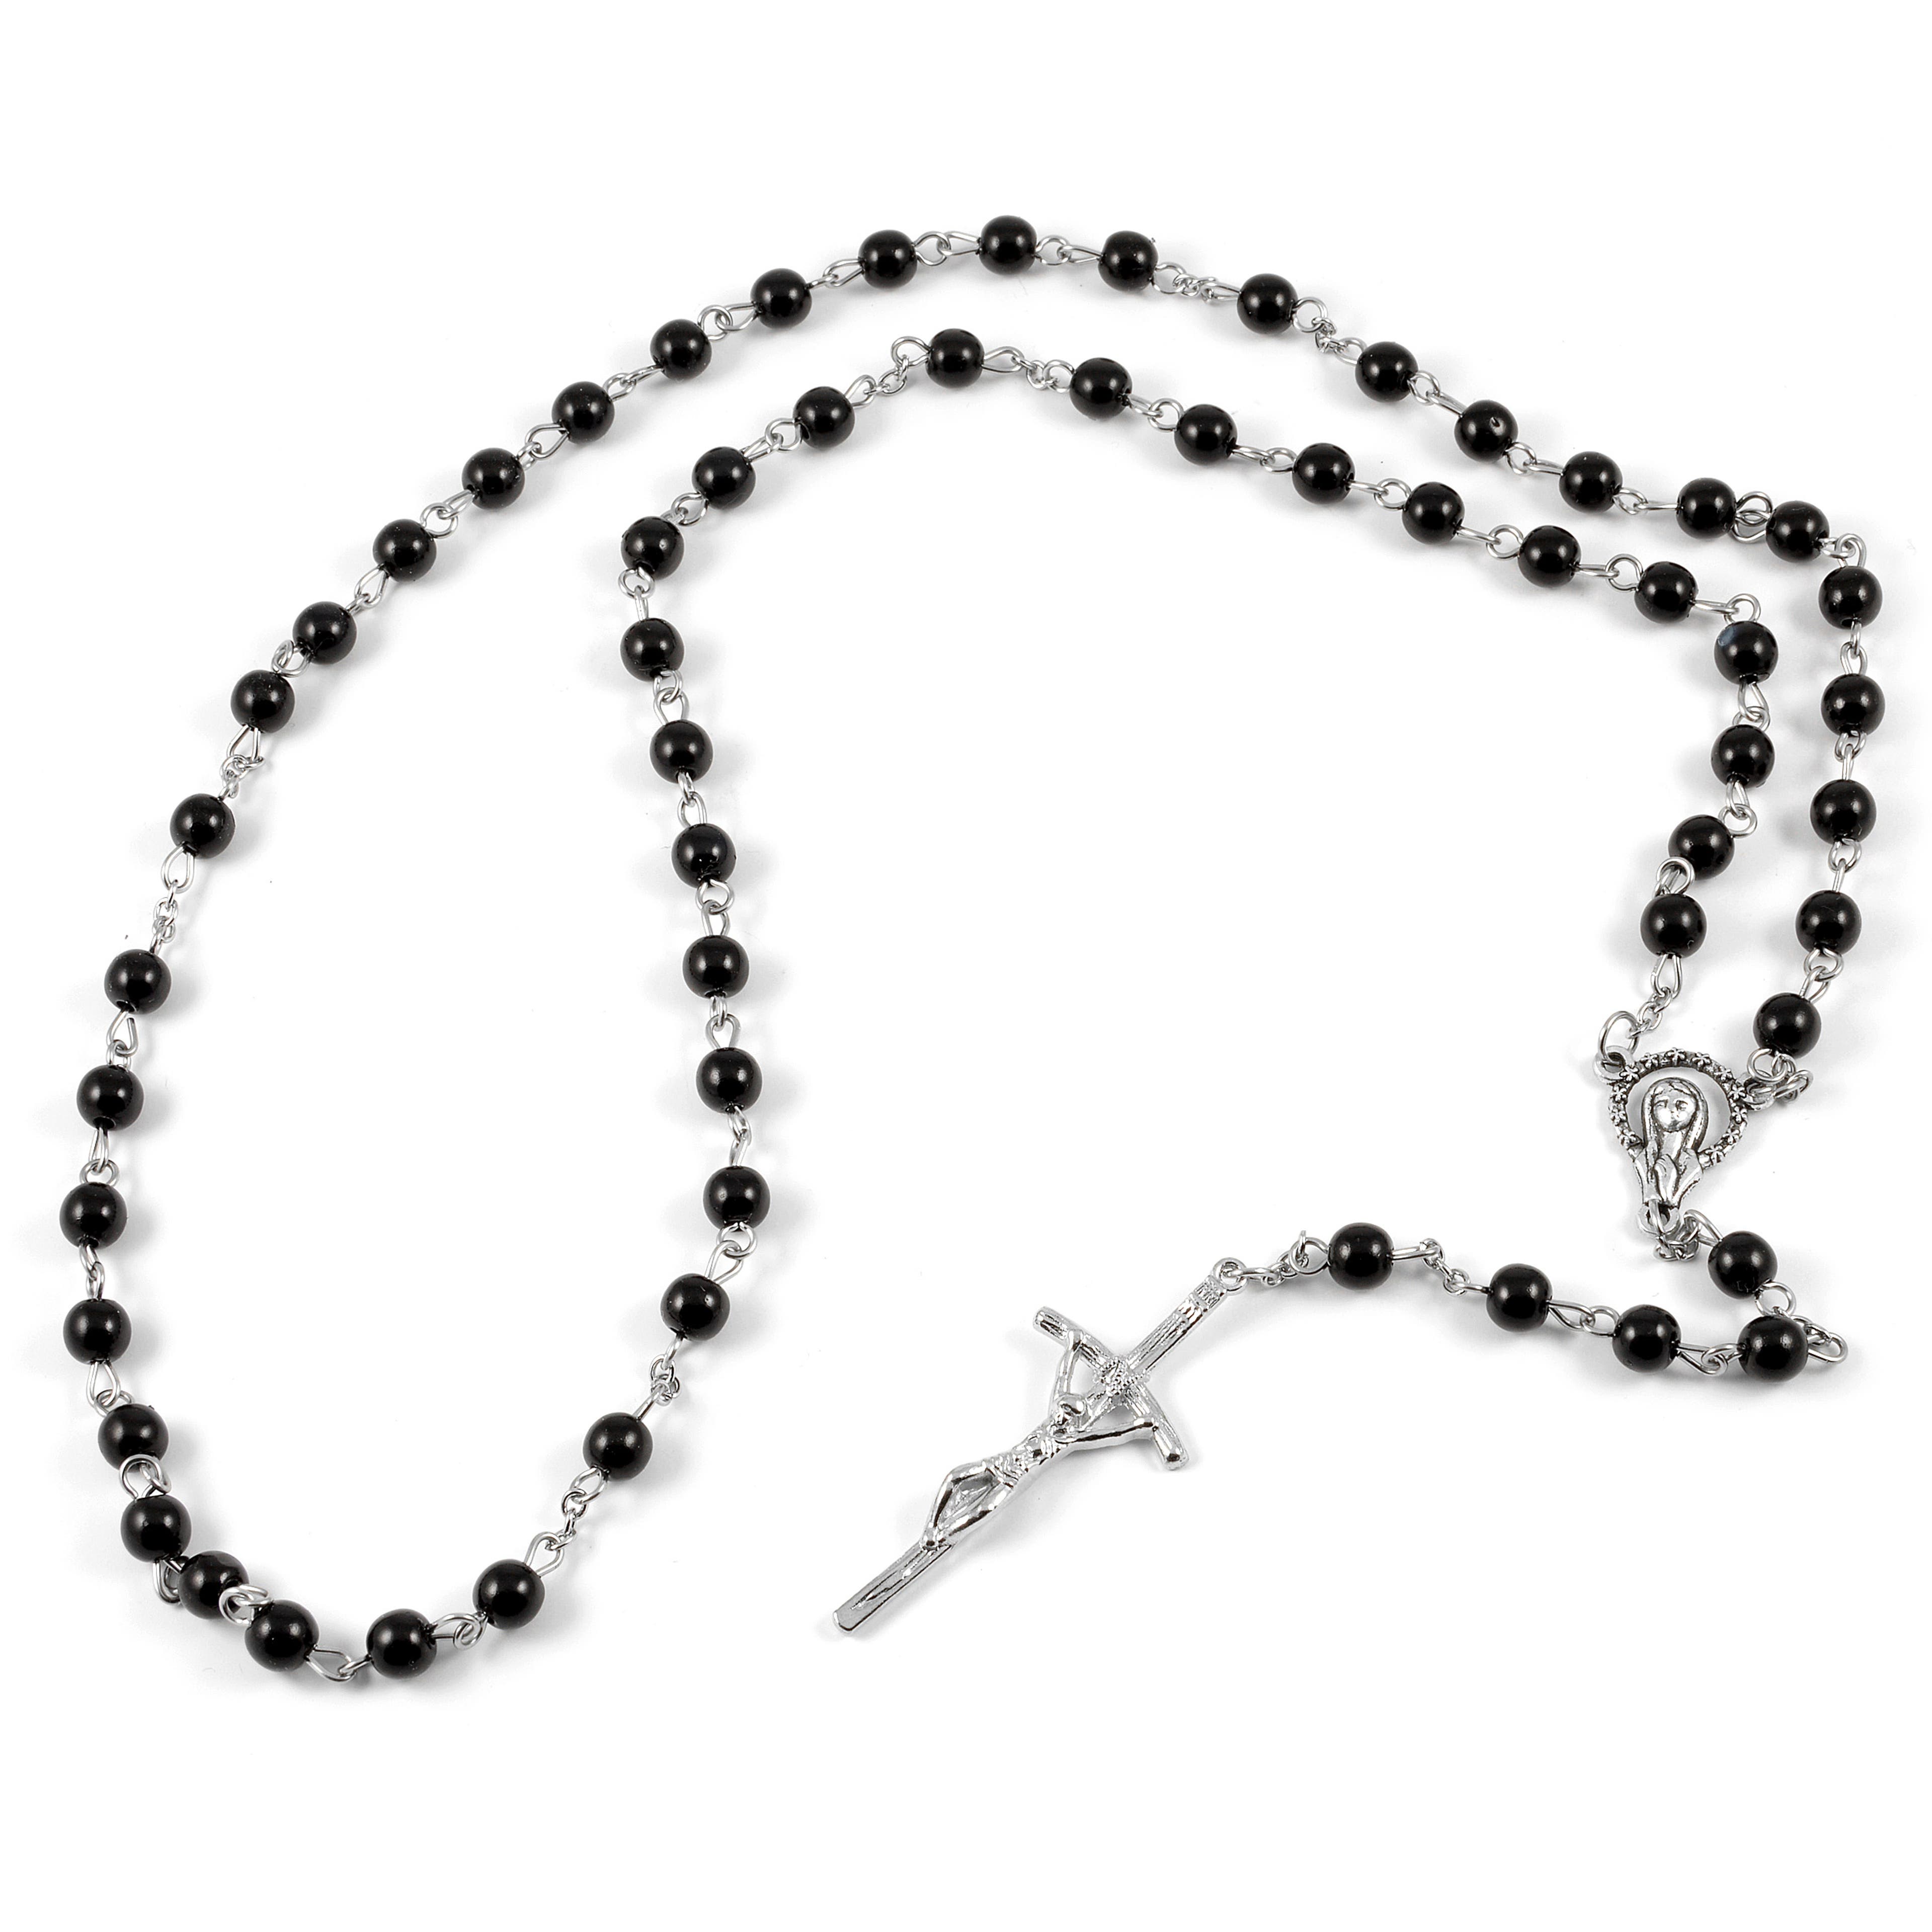 Silver-Tone Steel Jesus On The Cross Rosary Necklace